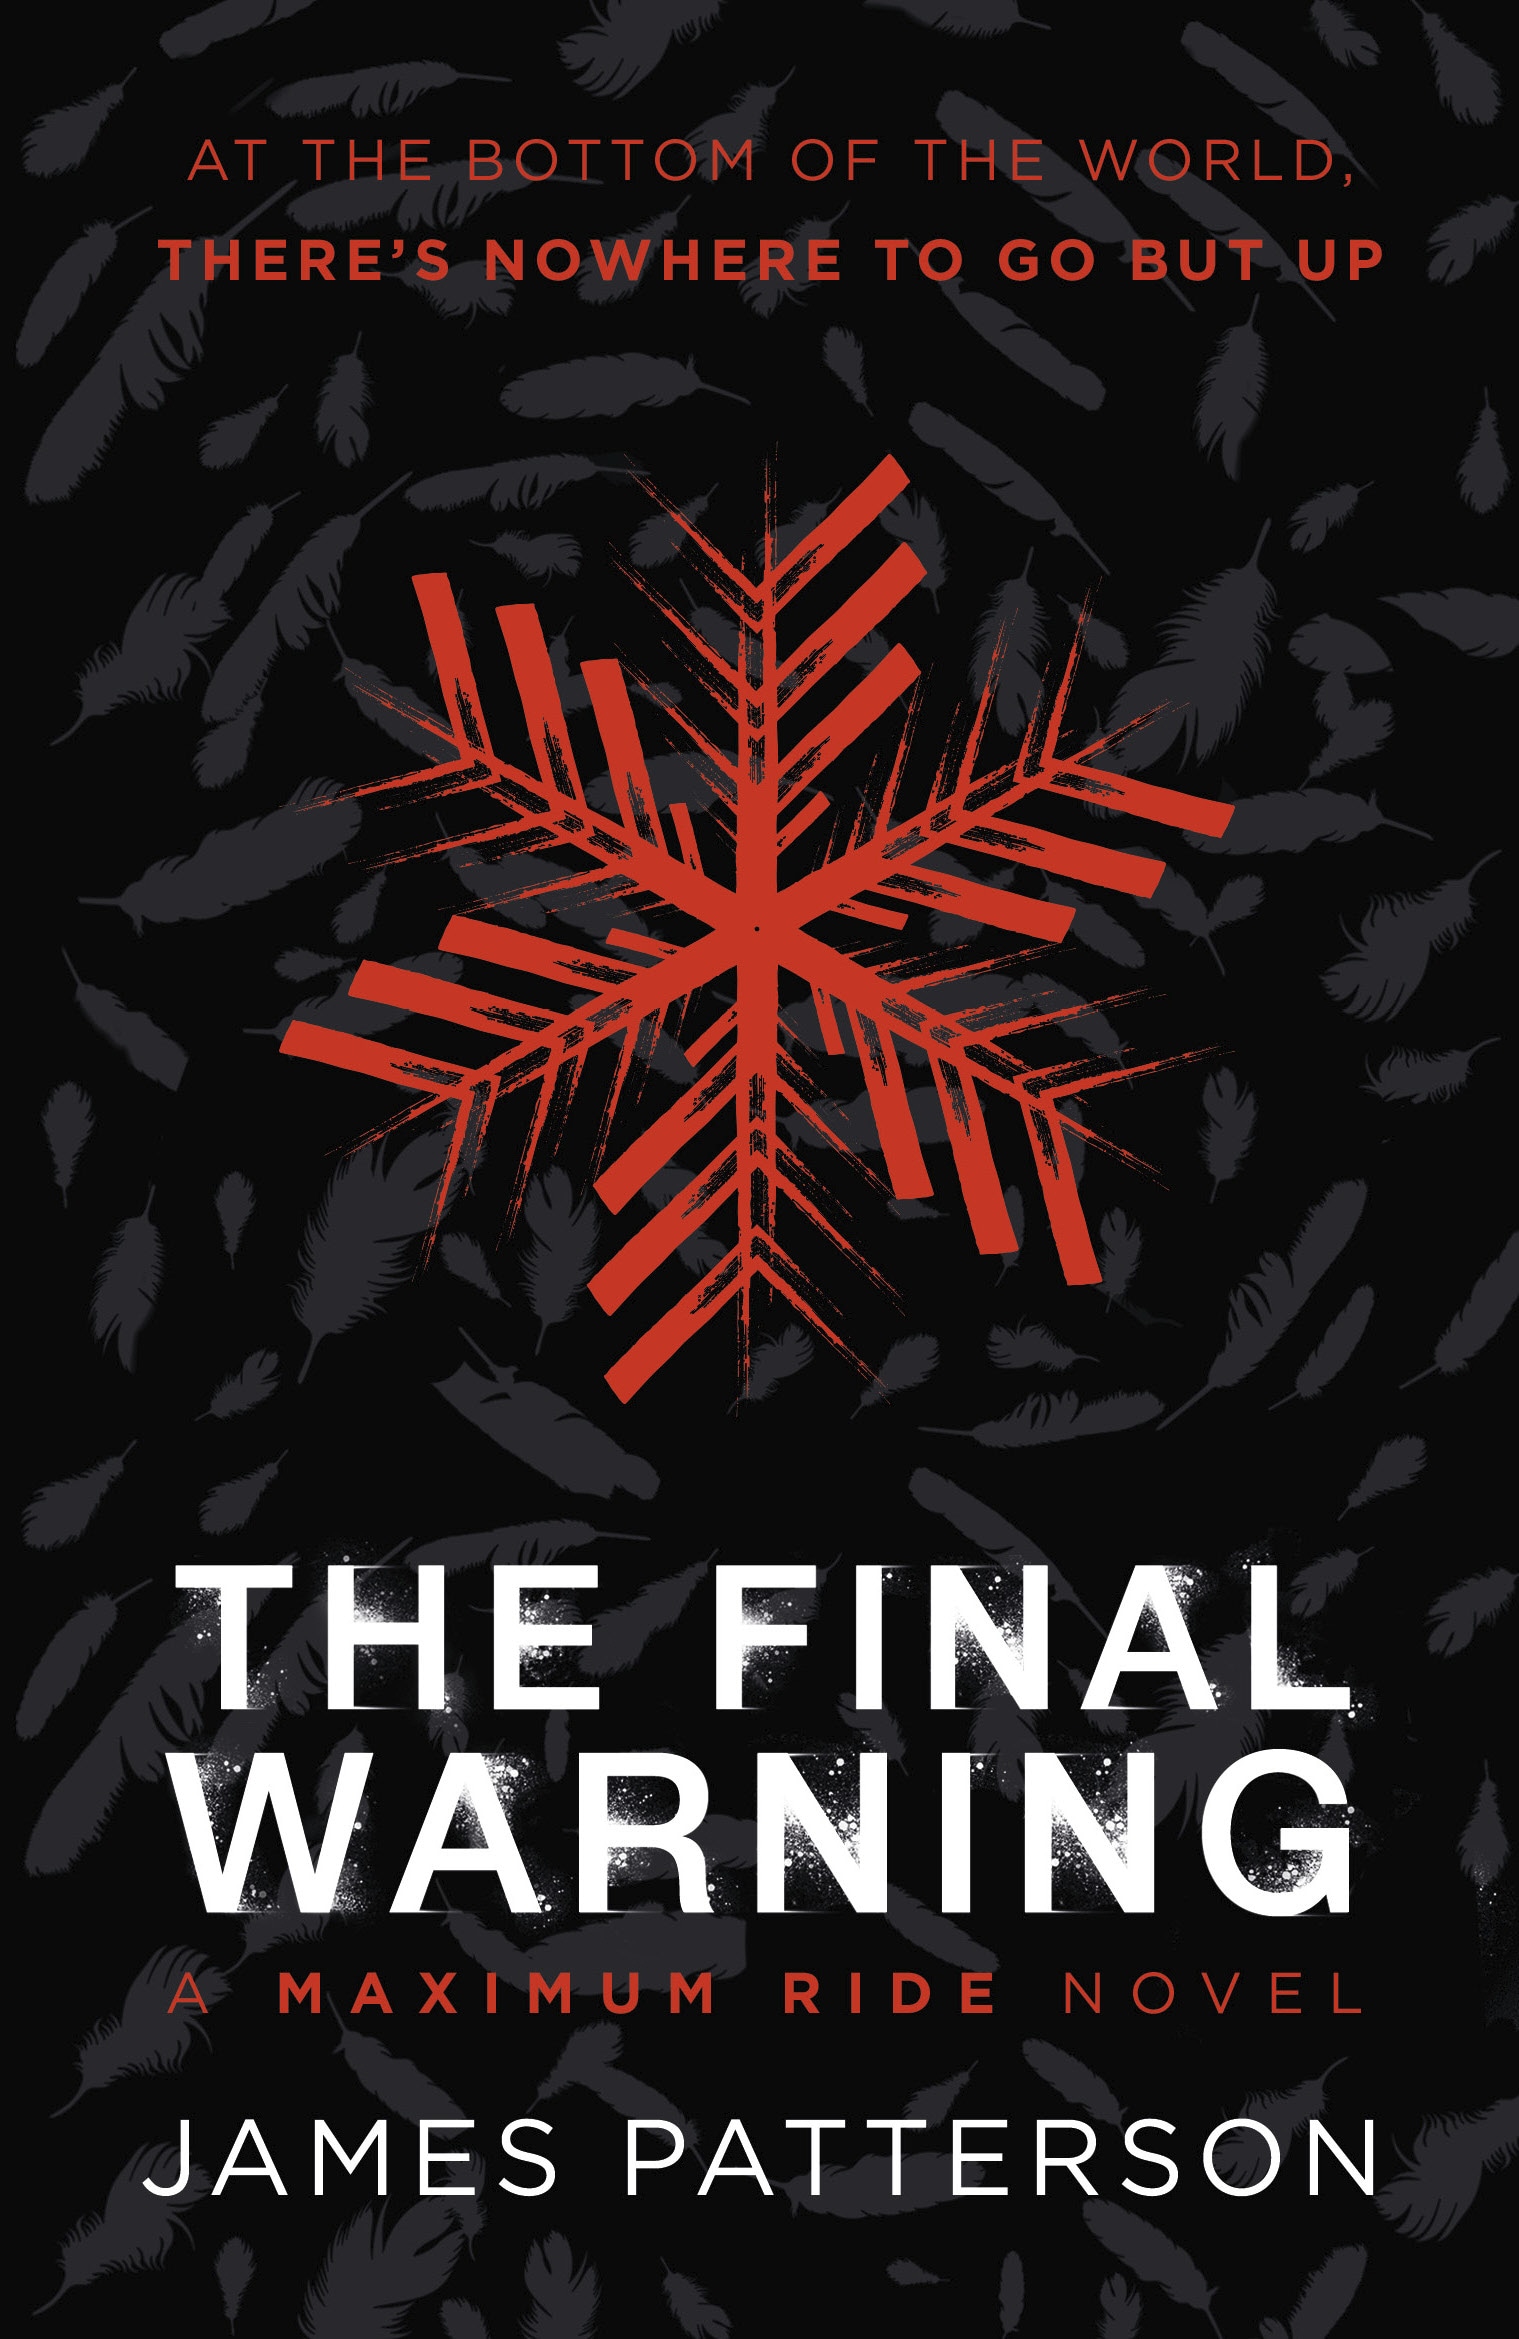 Book “The Final Warning: A Maximum Ride Novel” by James Patterson